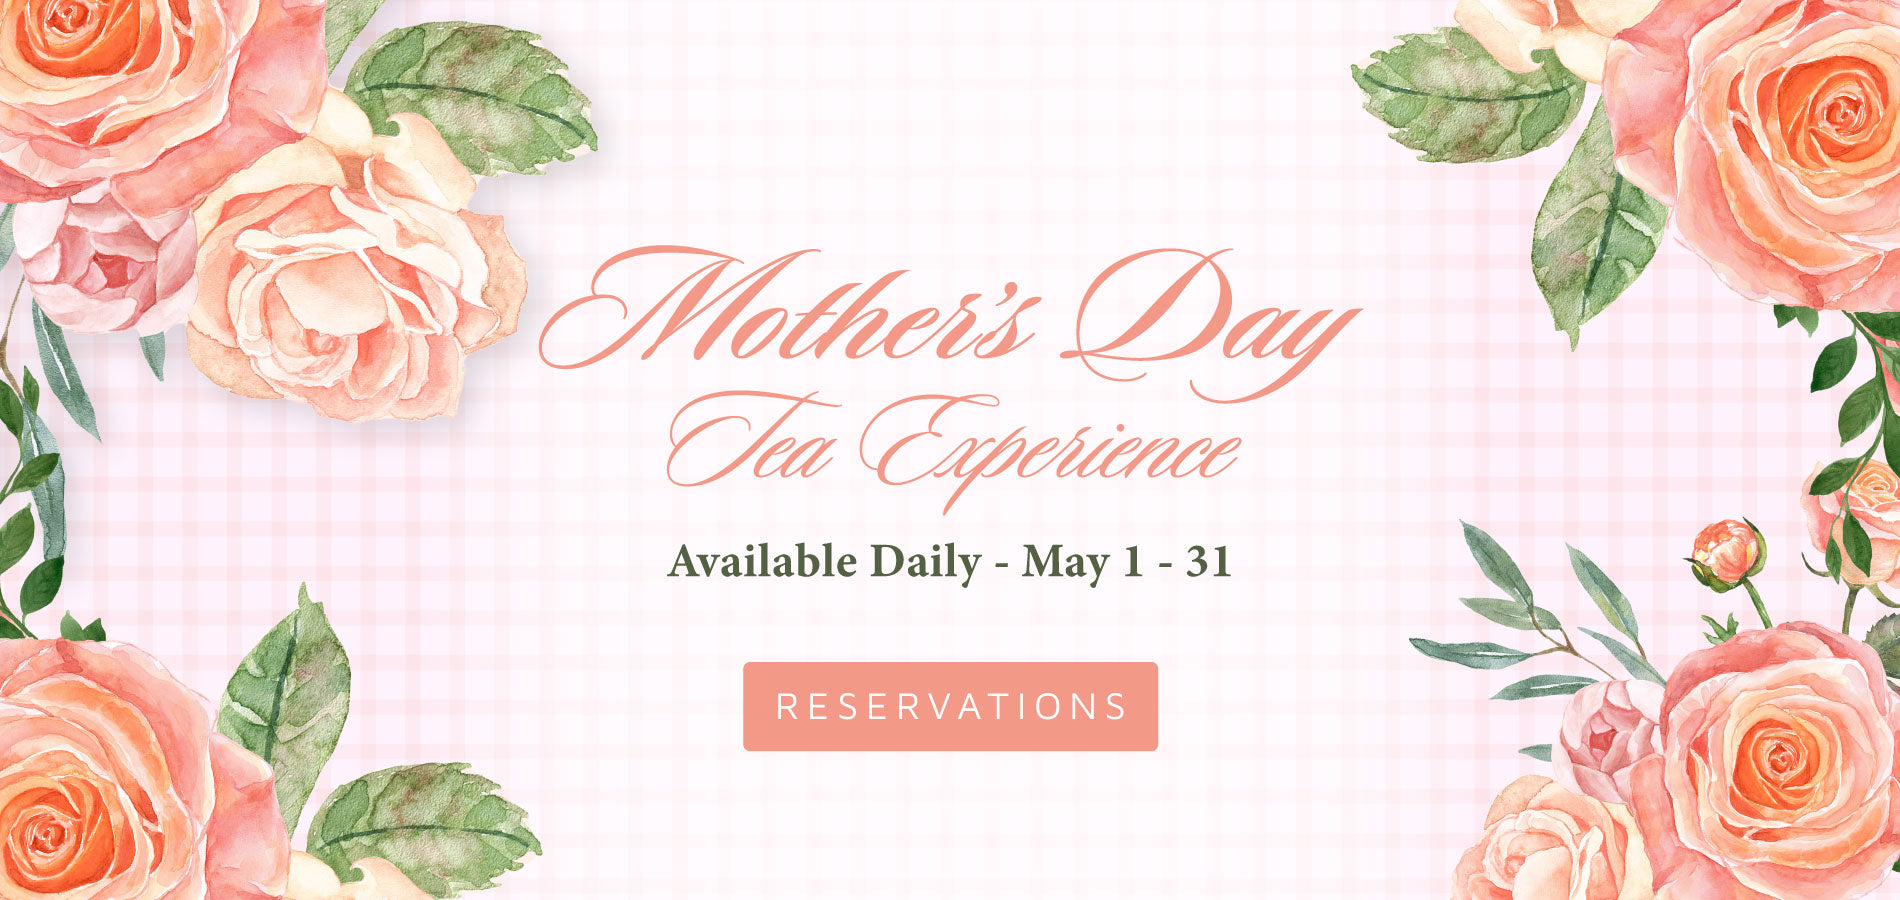 Mothers Day Tea Experience! May 1 -31